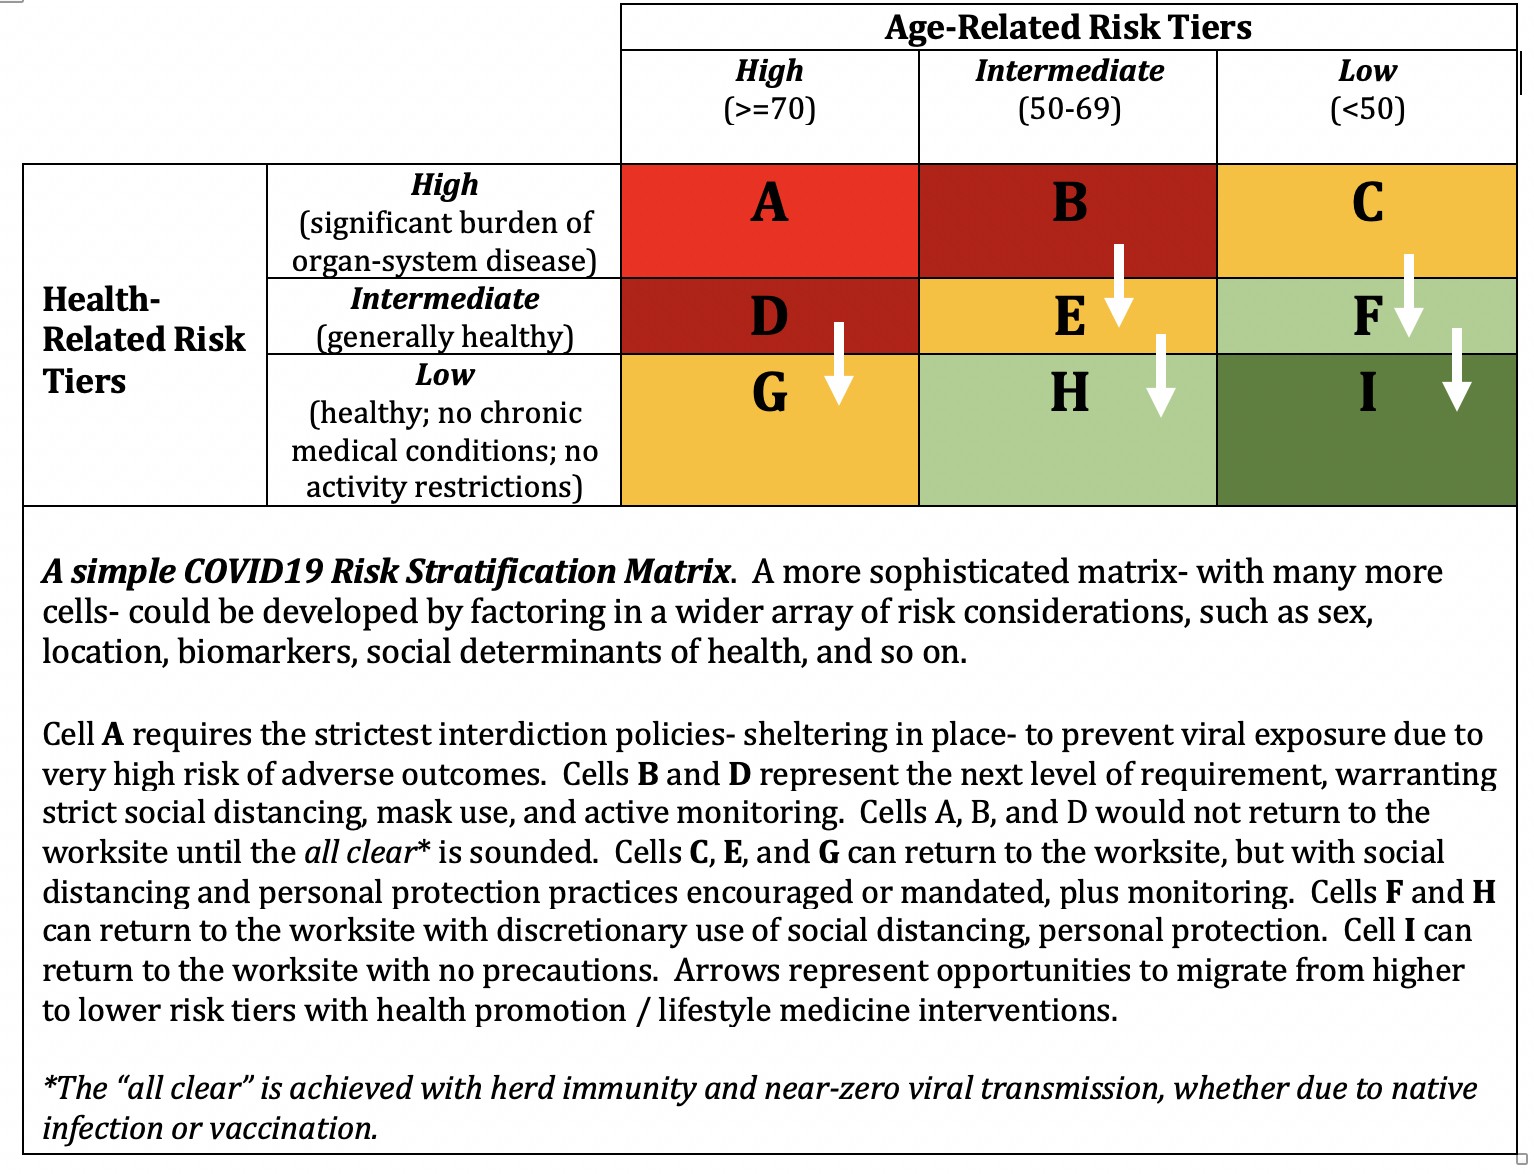 Chart showing age-related risk tiers and health-related risk tiers.